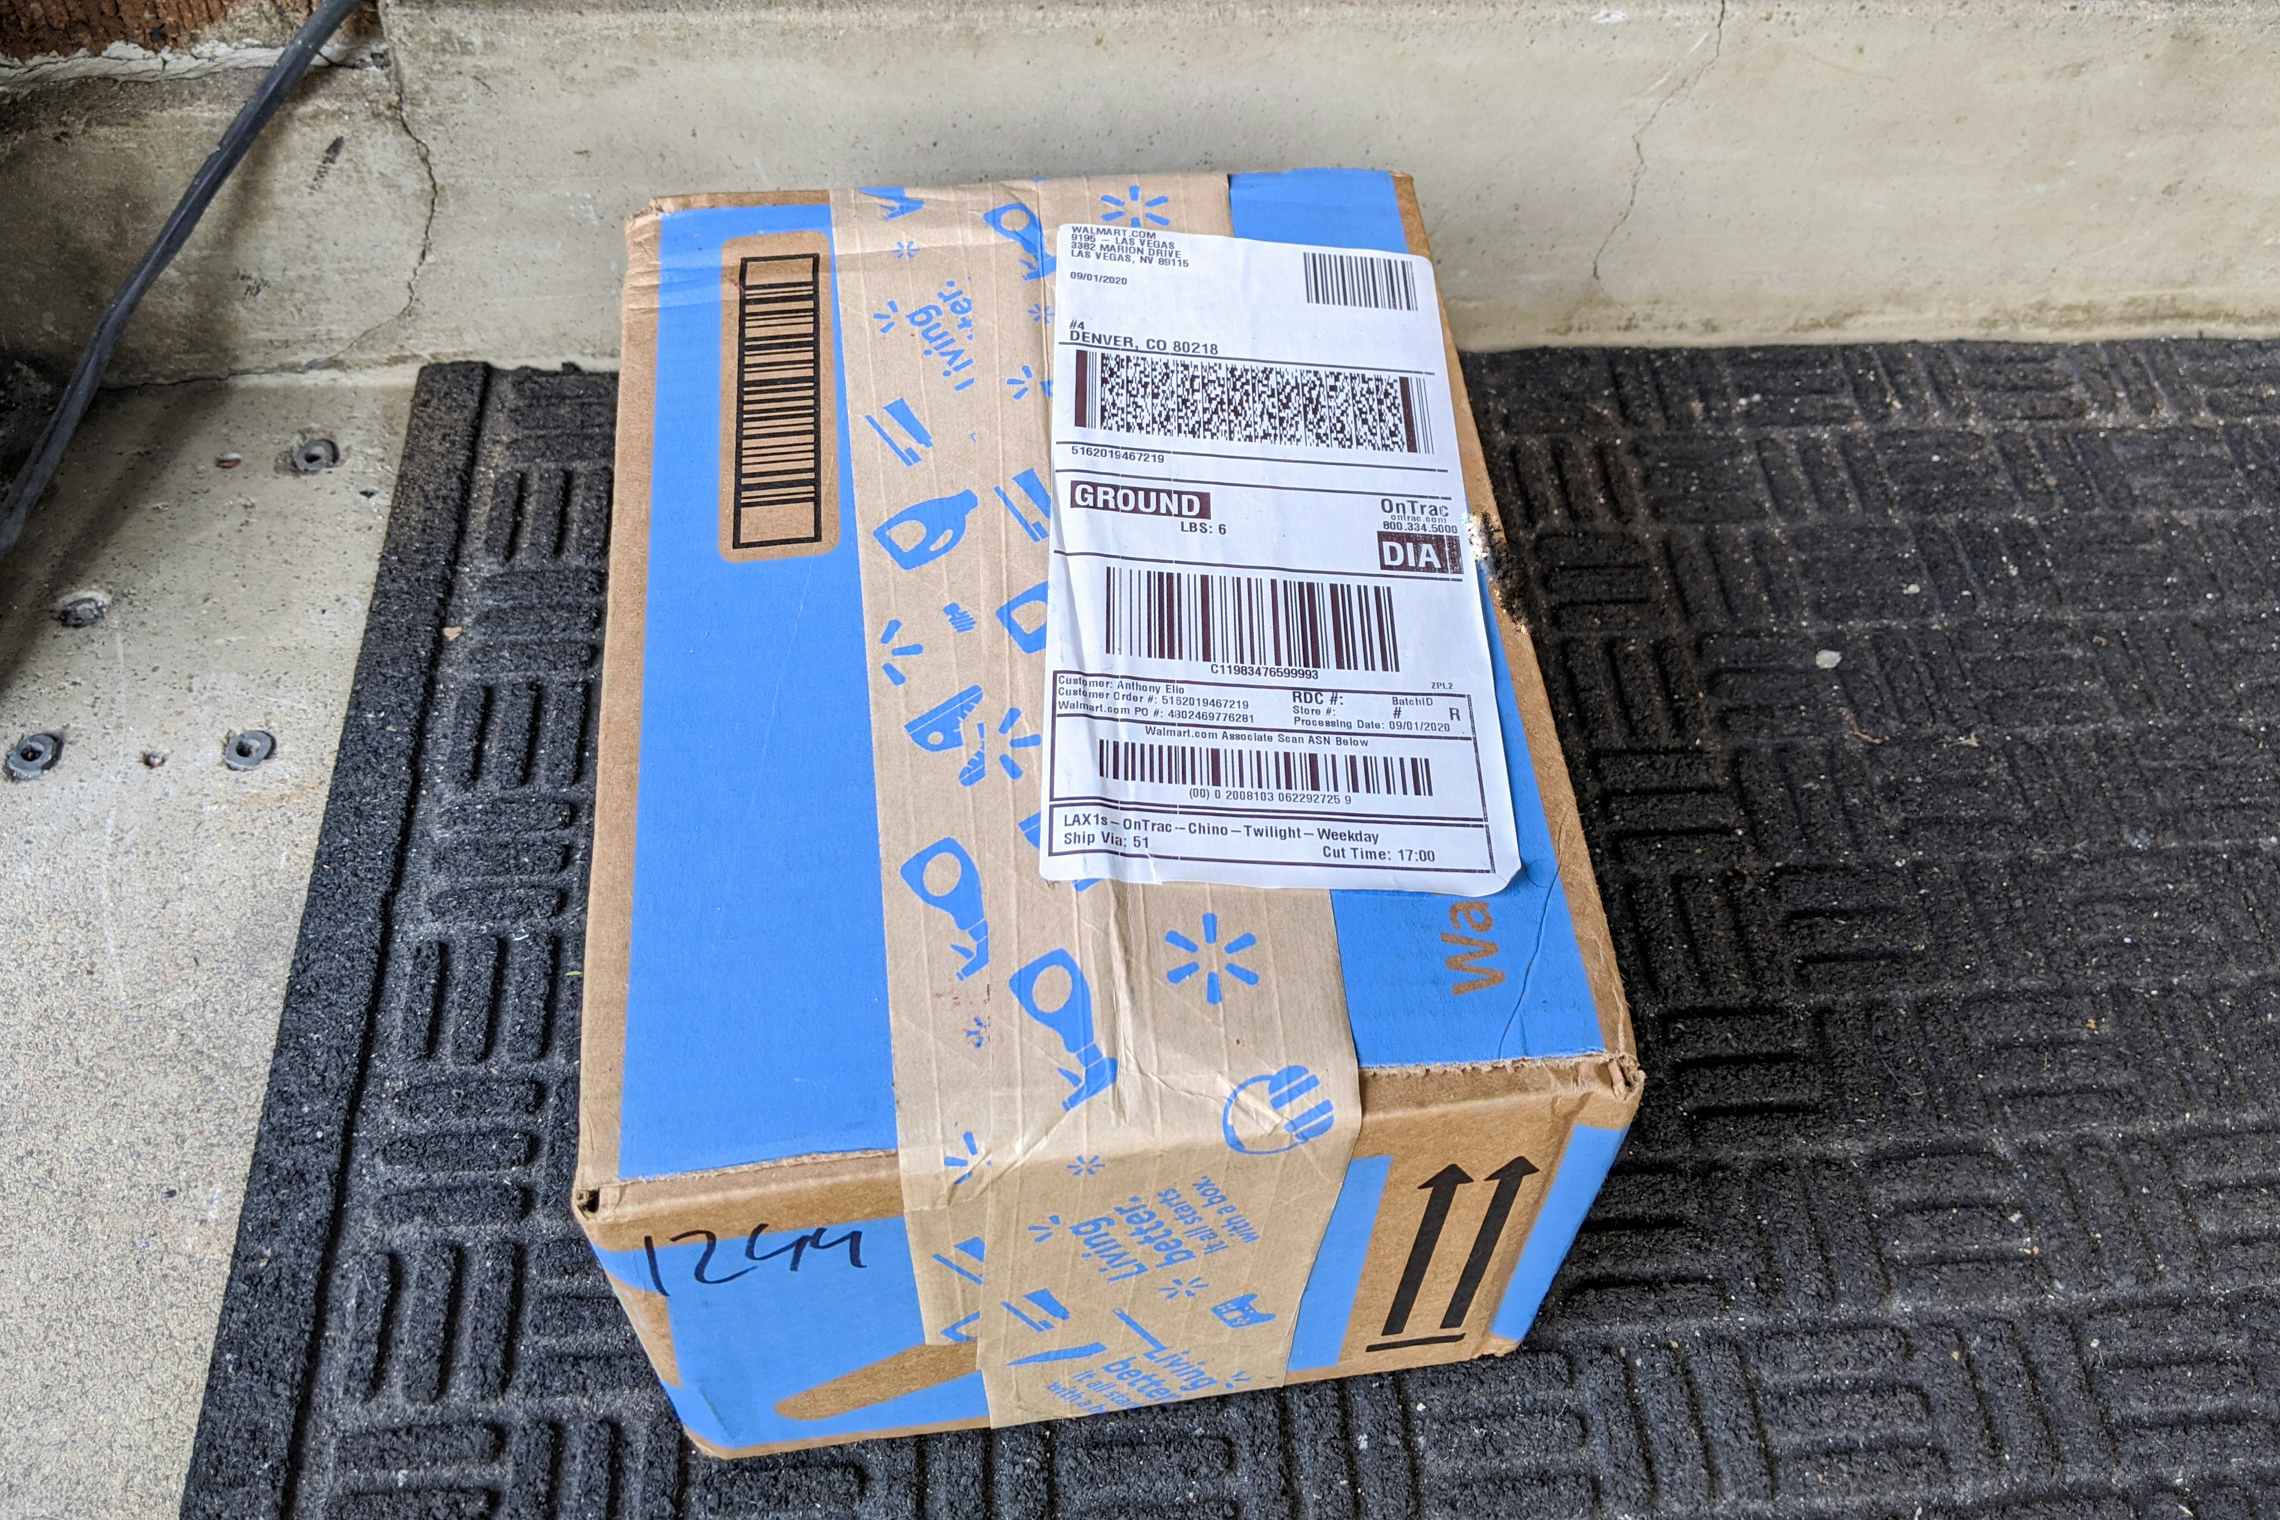 A Walmart package sitting on a doorstep